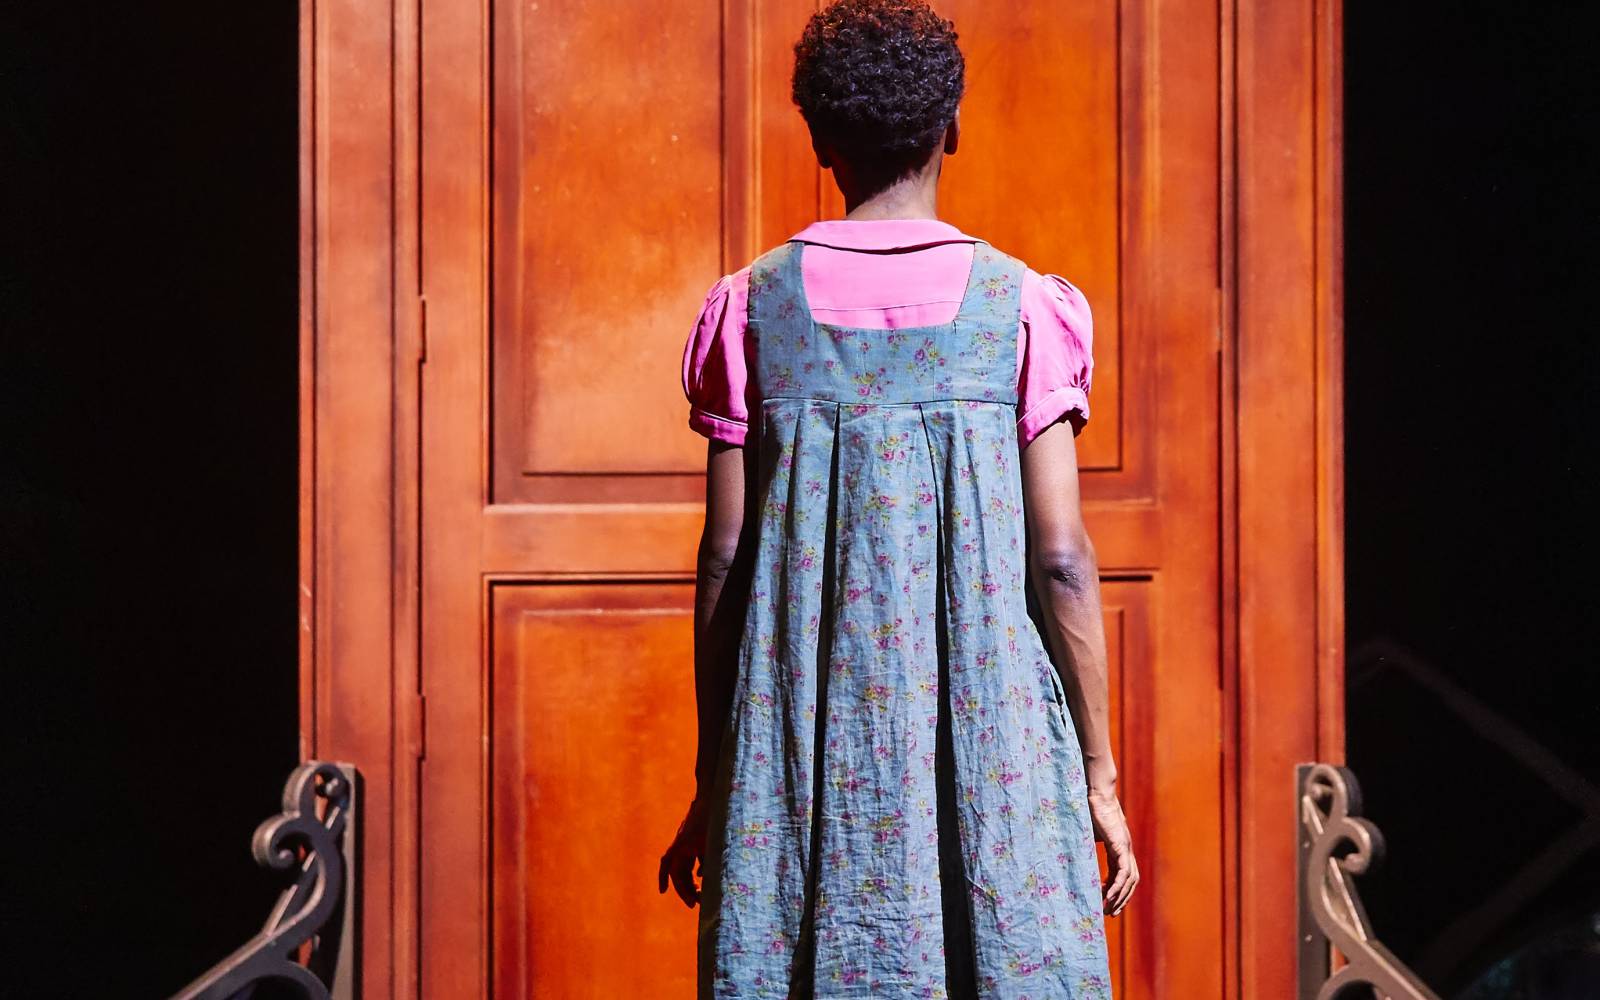 A woman seen from behind. She stands in front of a large wooden door